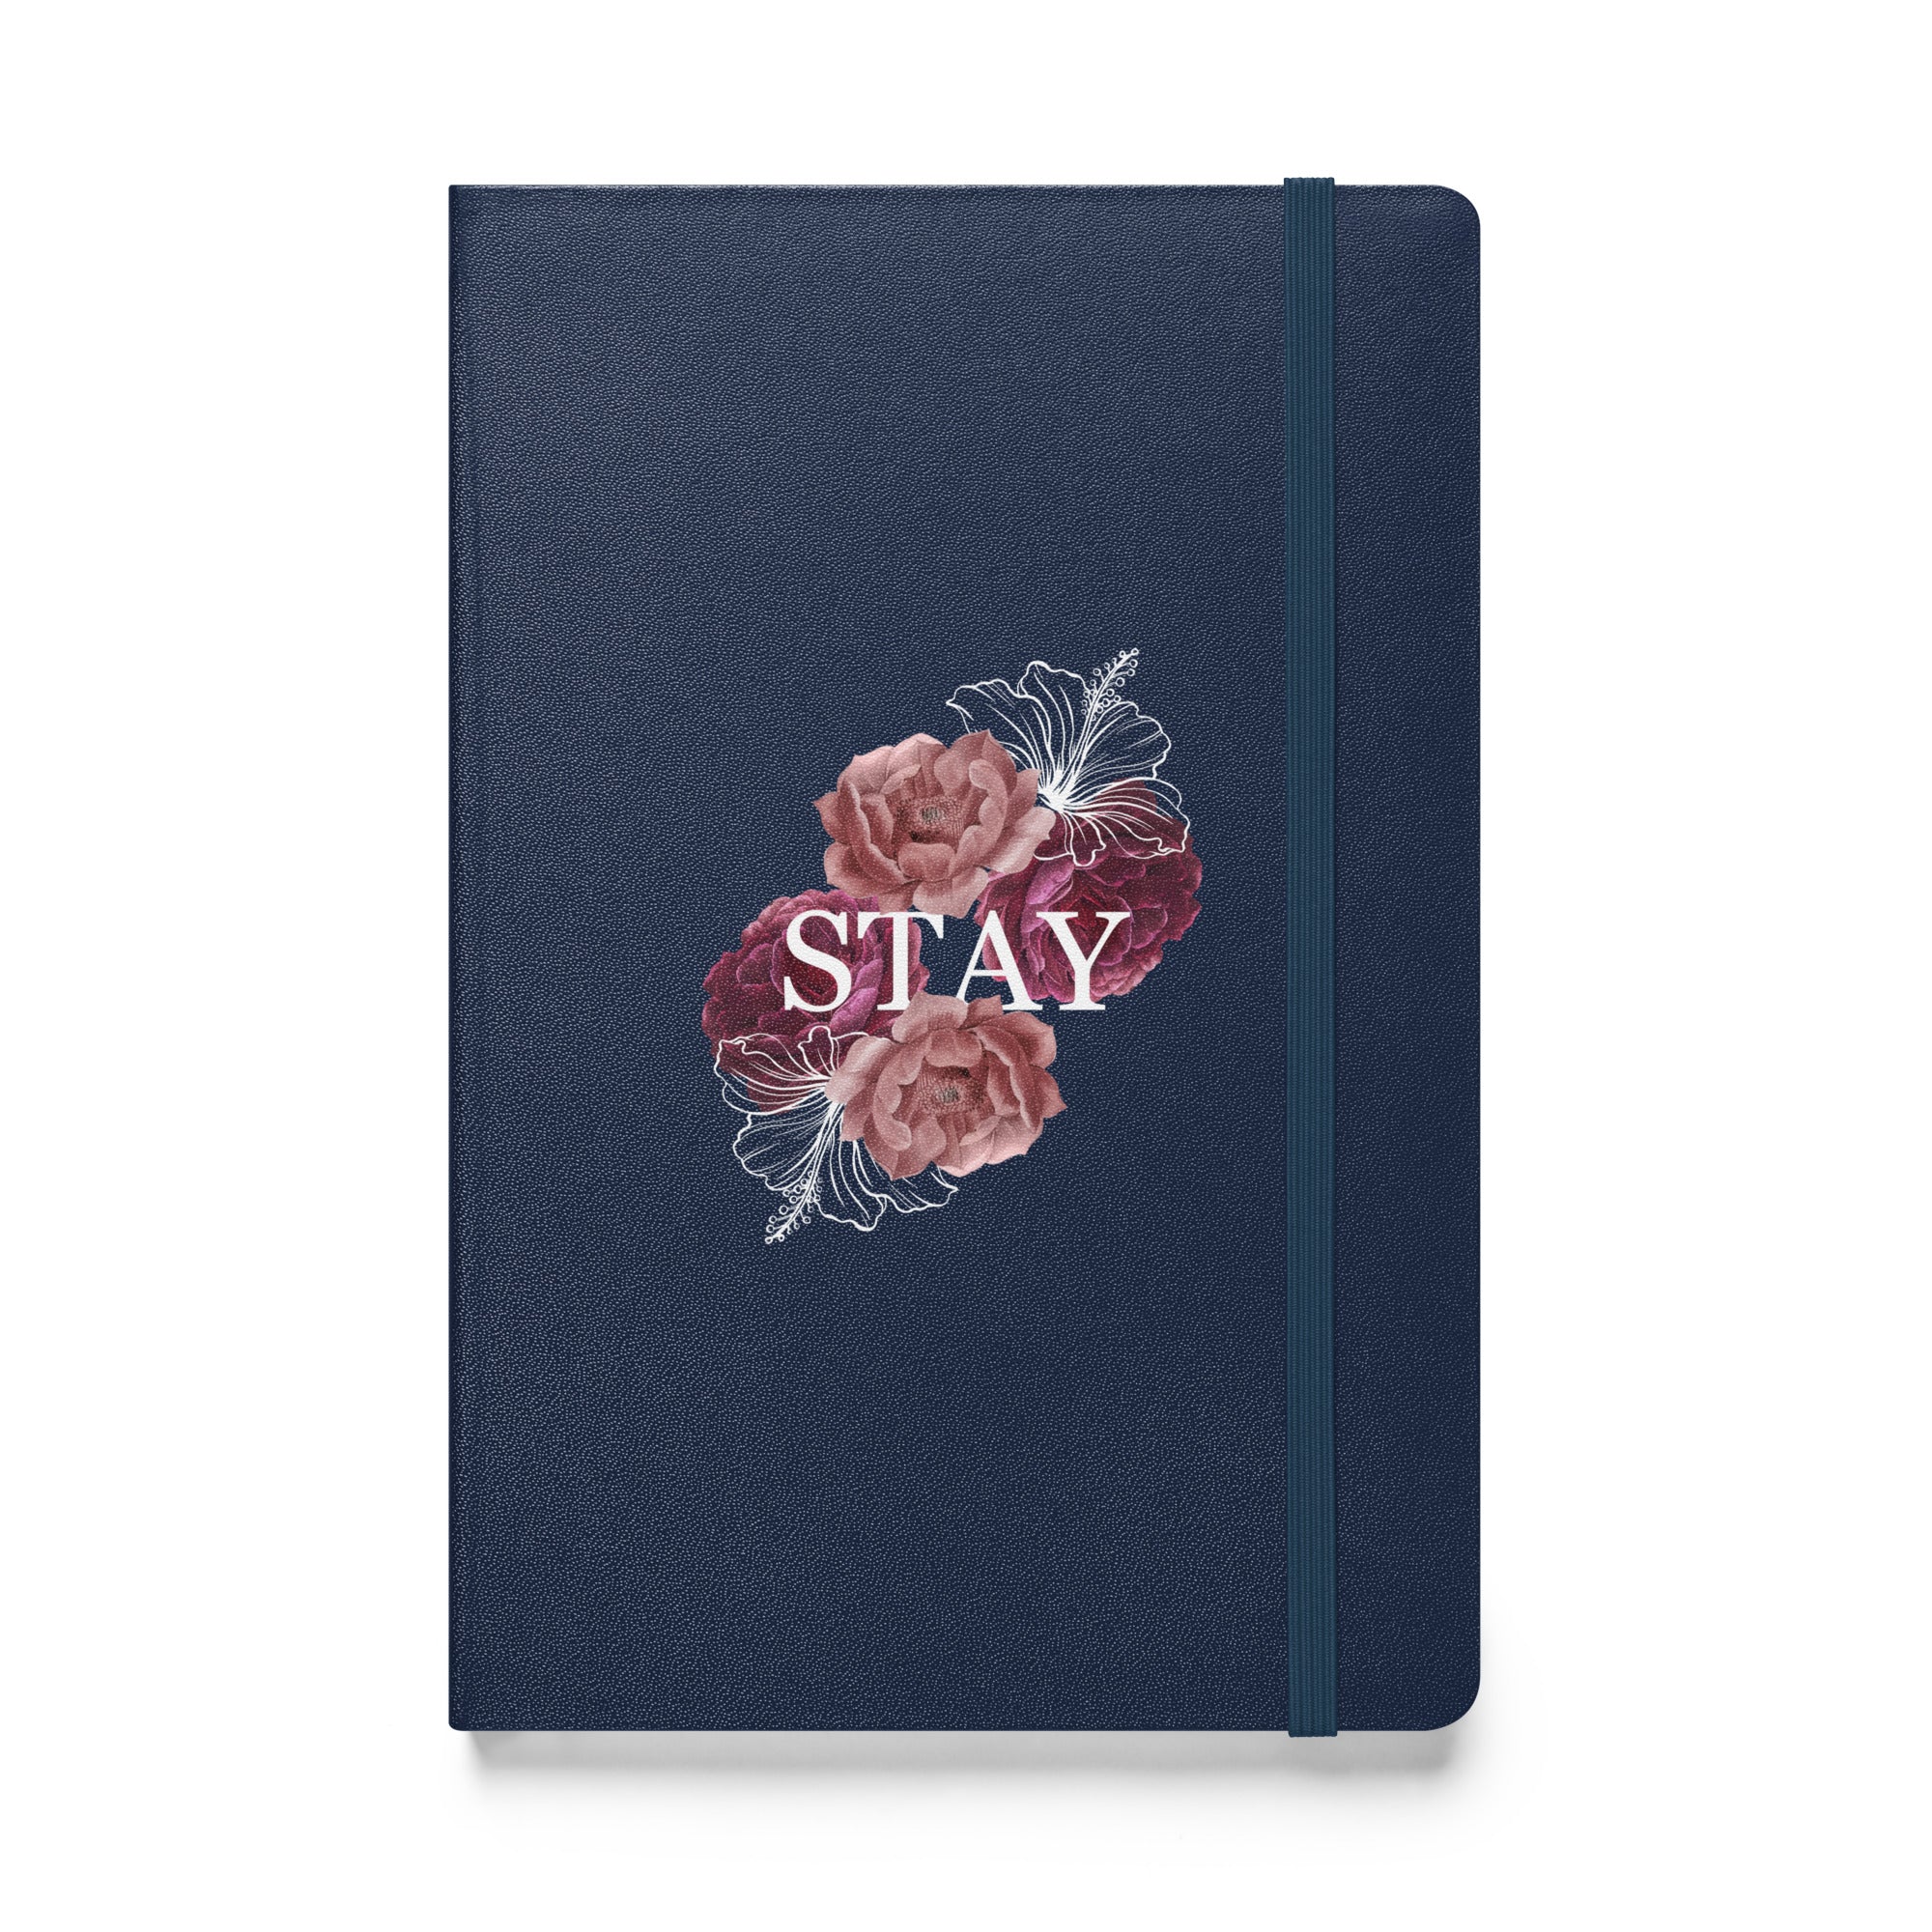 Stay - Hardcover Bound Notebook